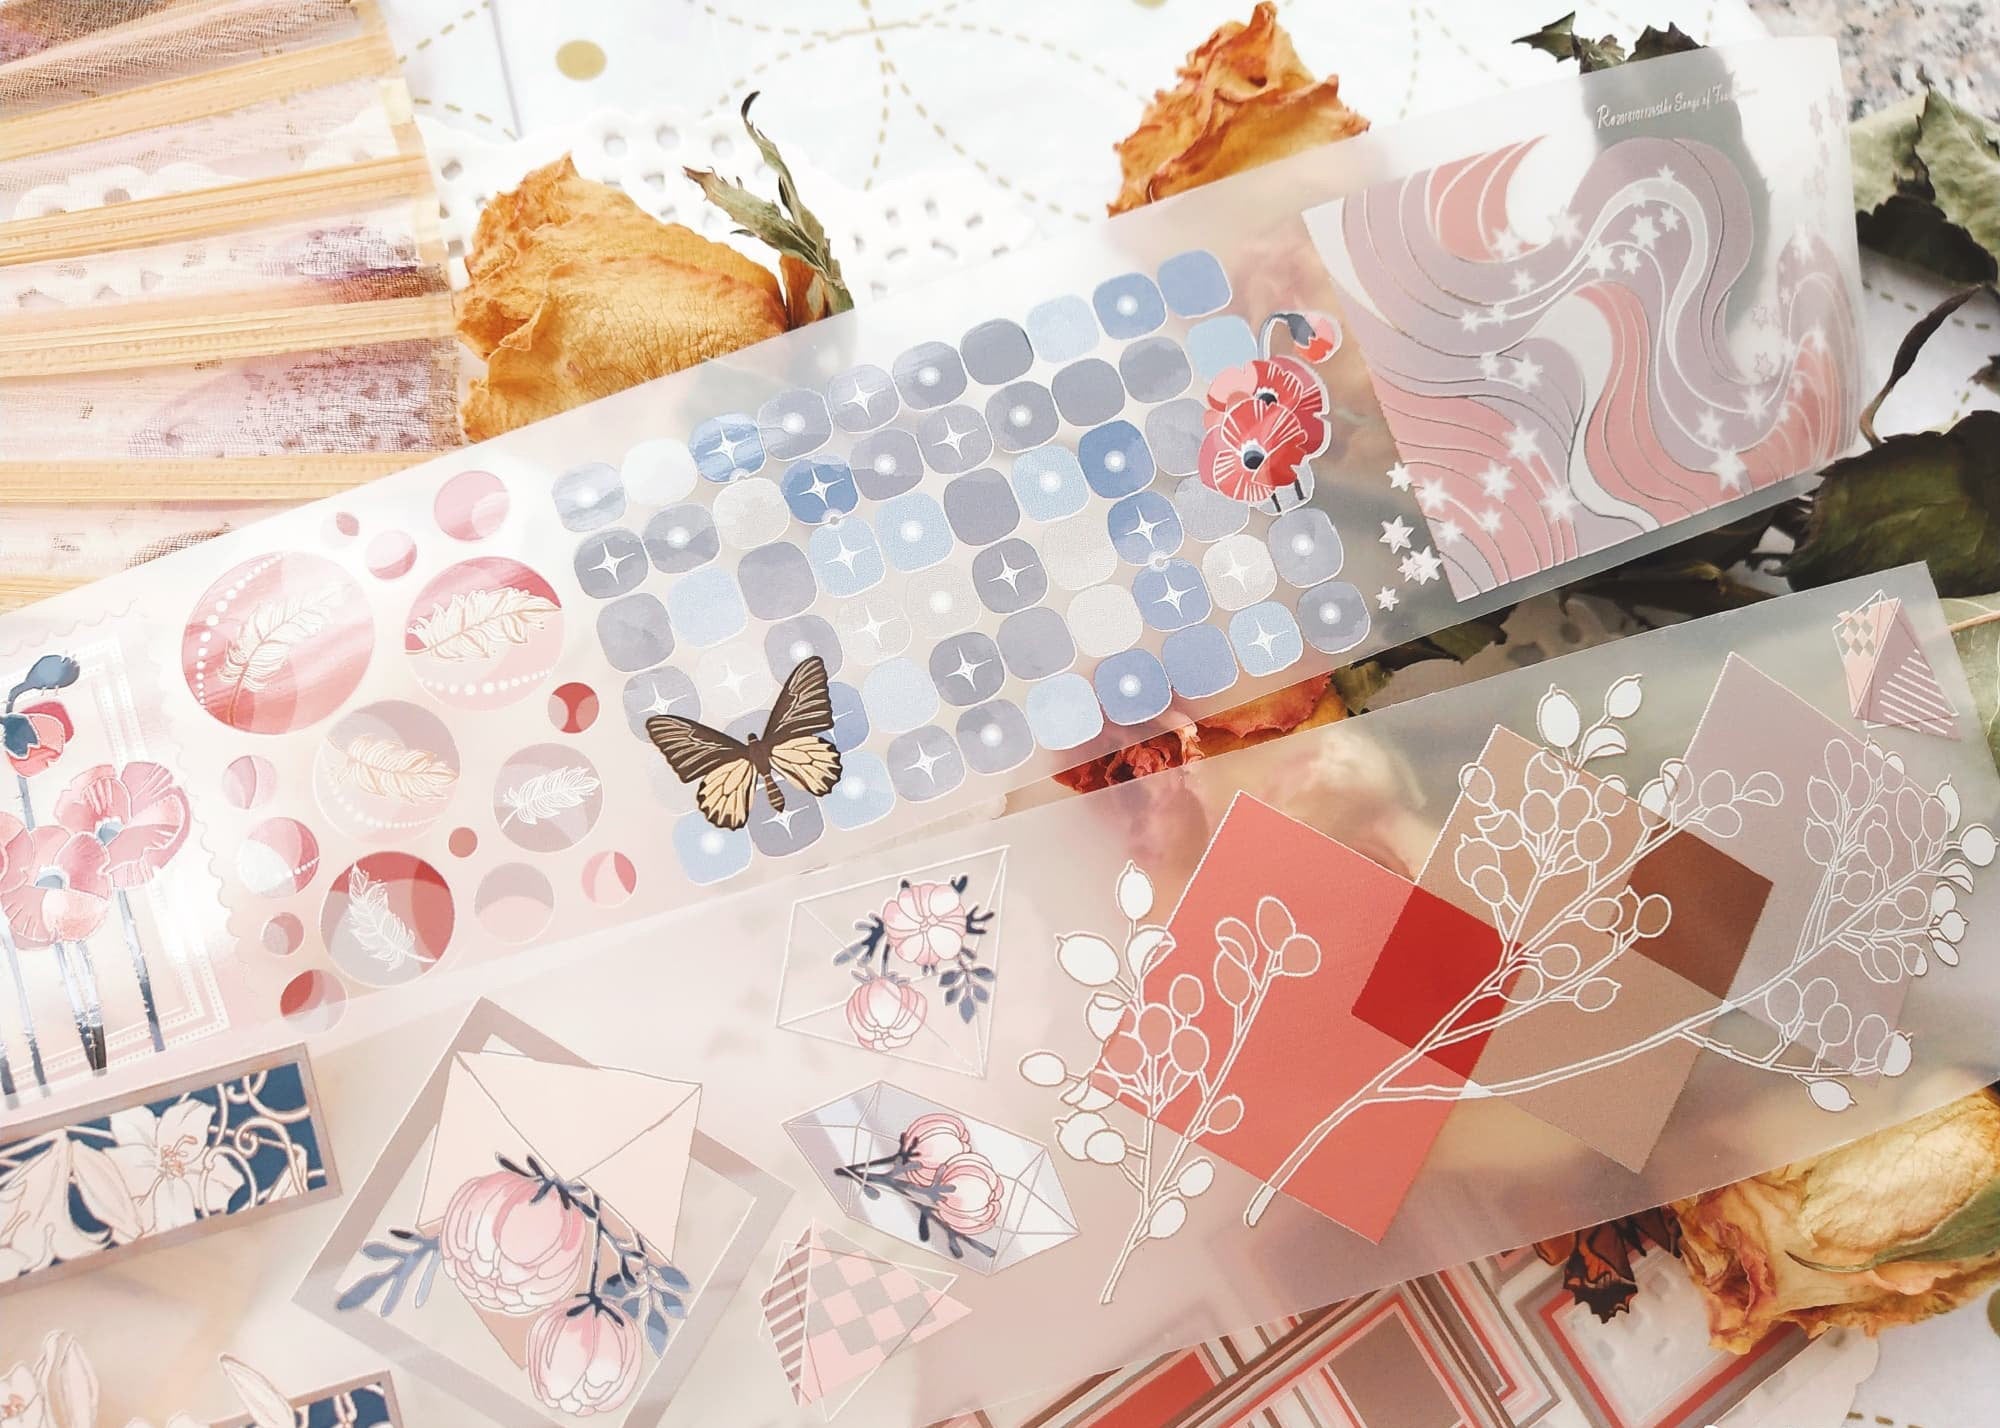 Tianxiaobao's Starry Sky: Melody of the Seasons Masking Tape